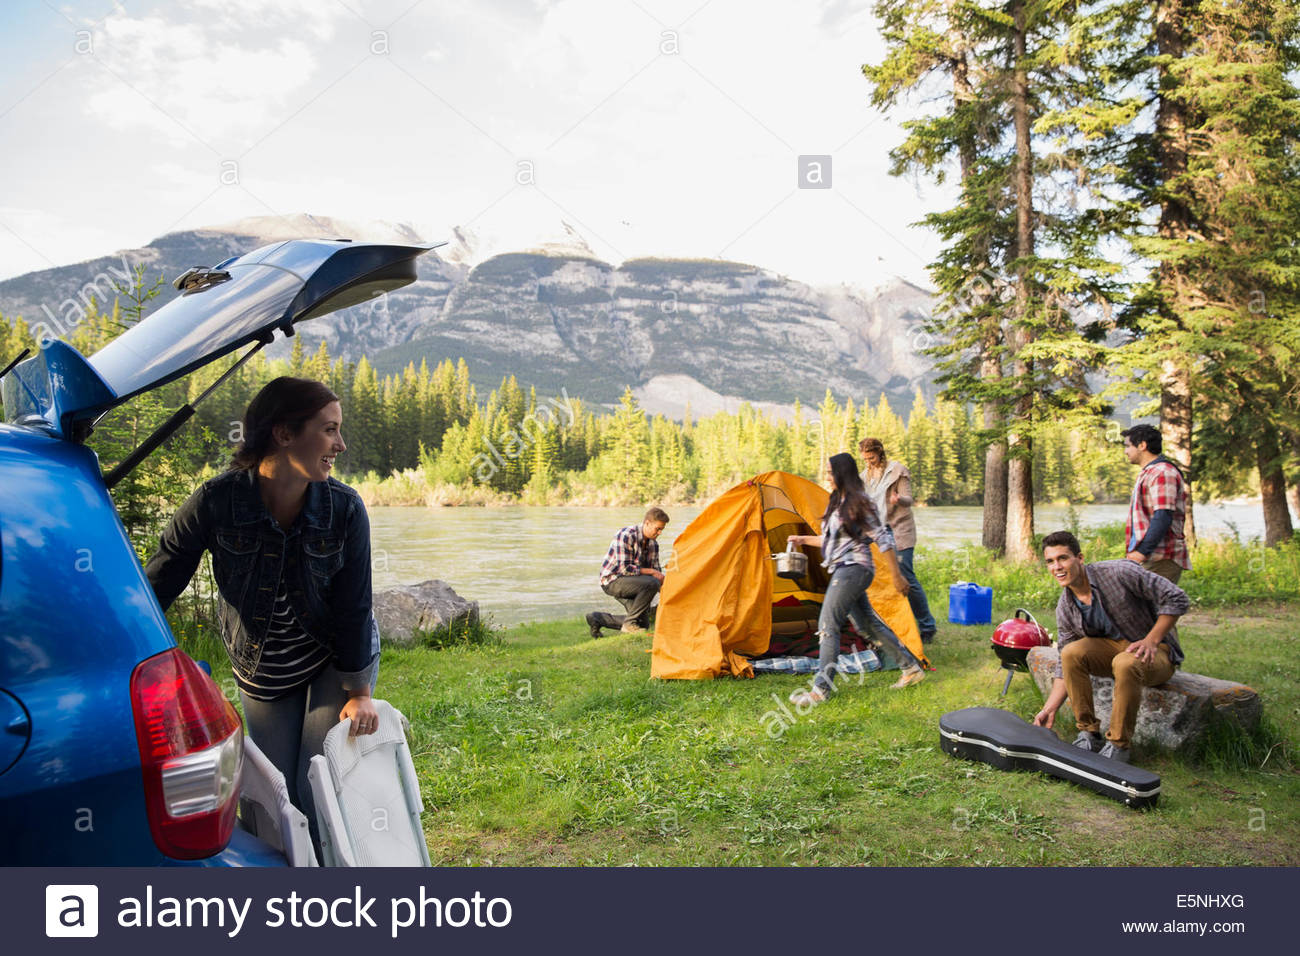 Friends assembling tent at campsite near mountains Stock Photo